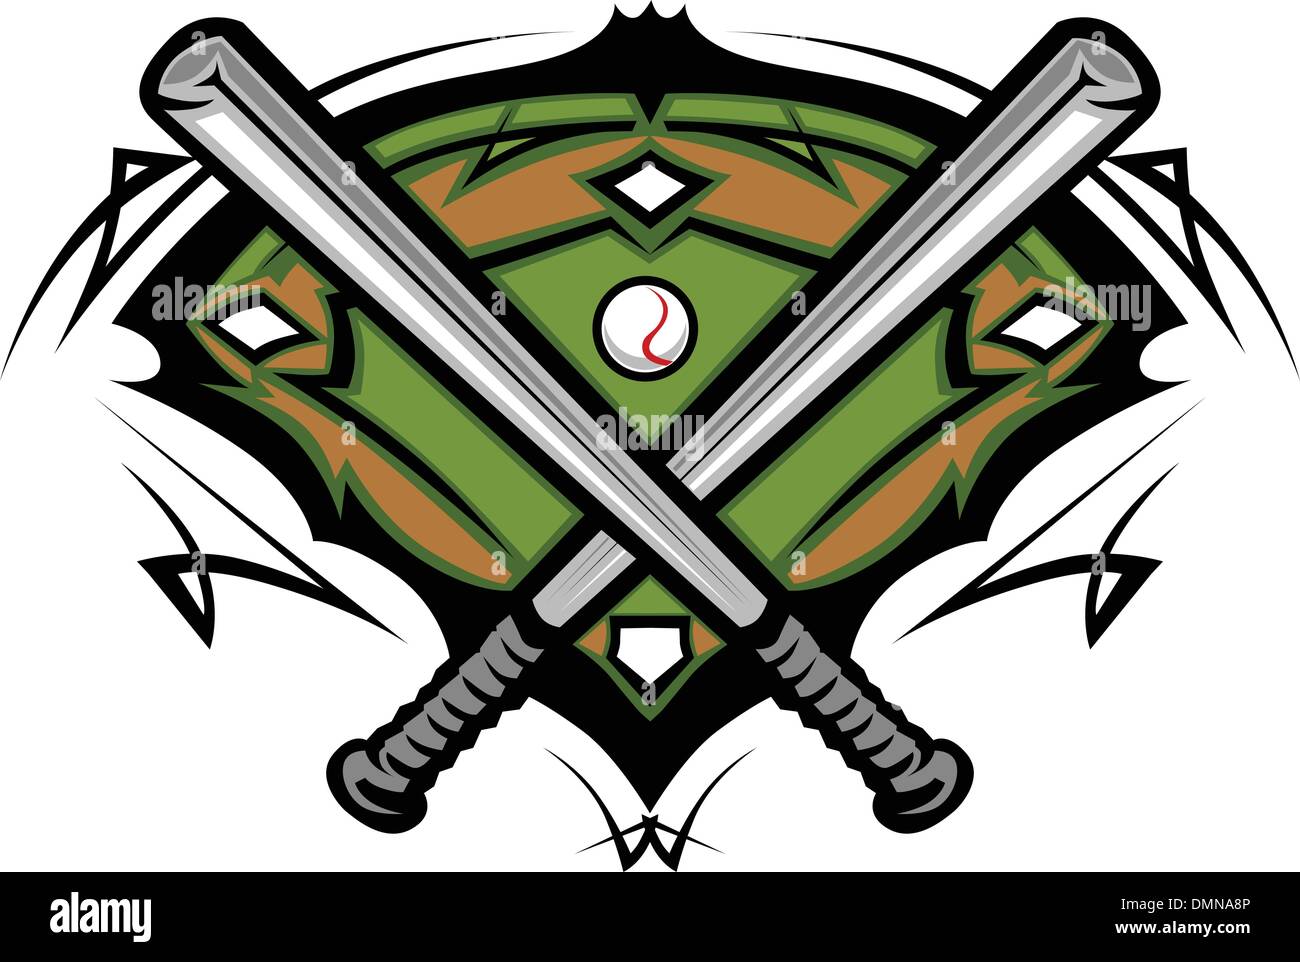 Baseball Field with Softball Crossed Bats Vector Image Template Stock Vector